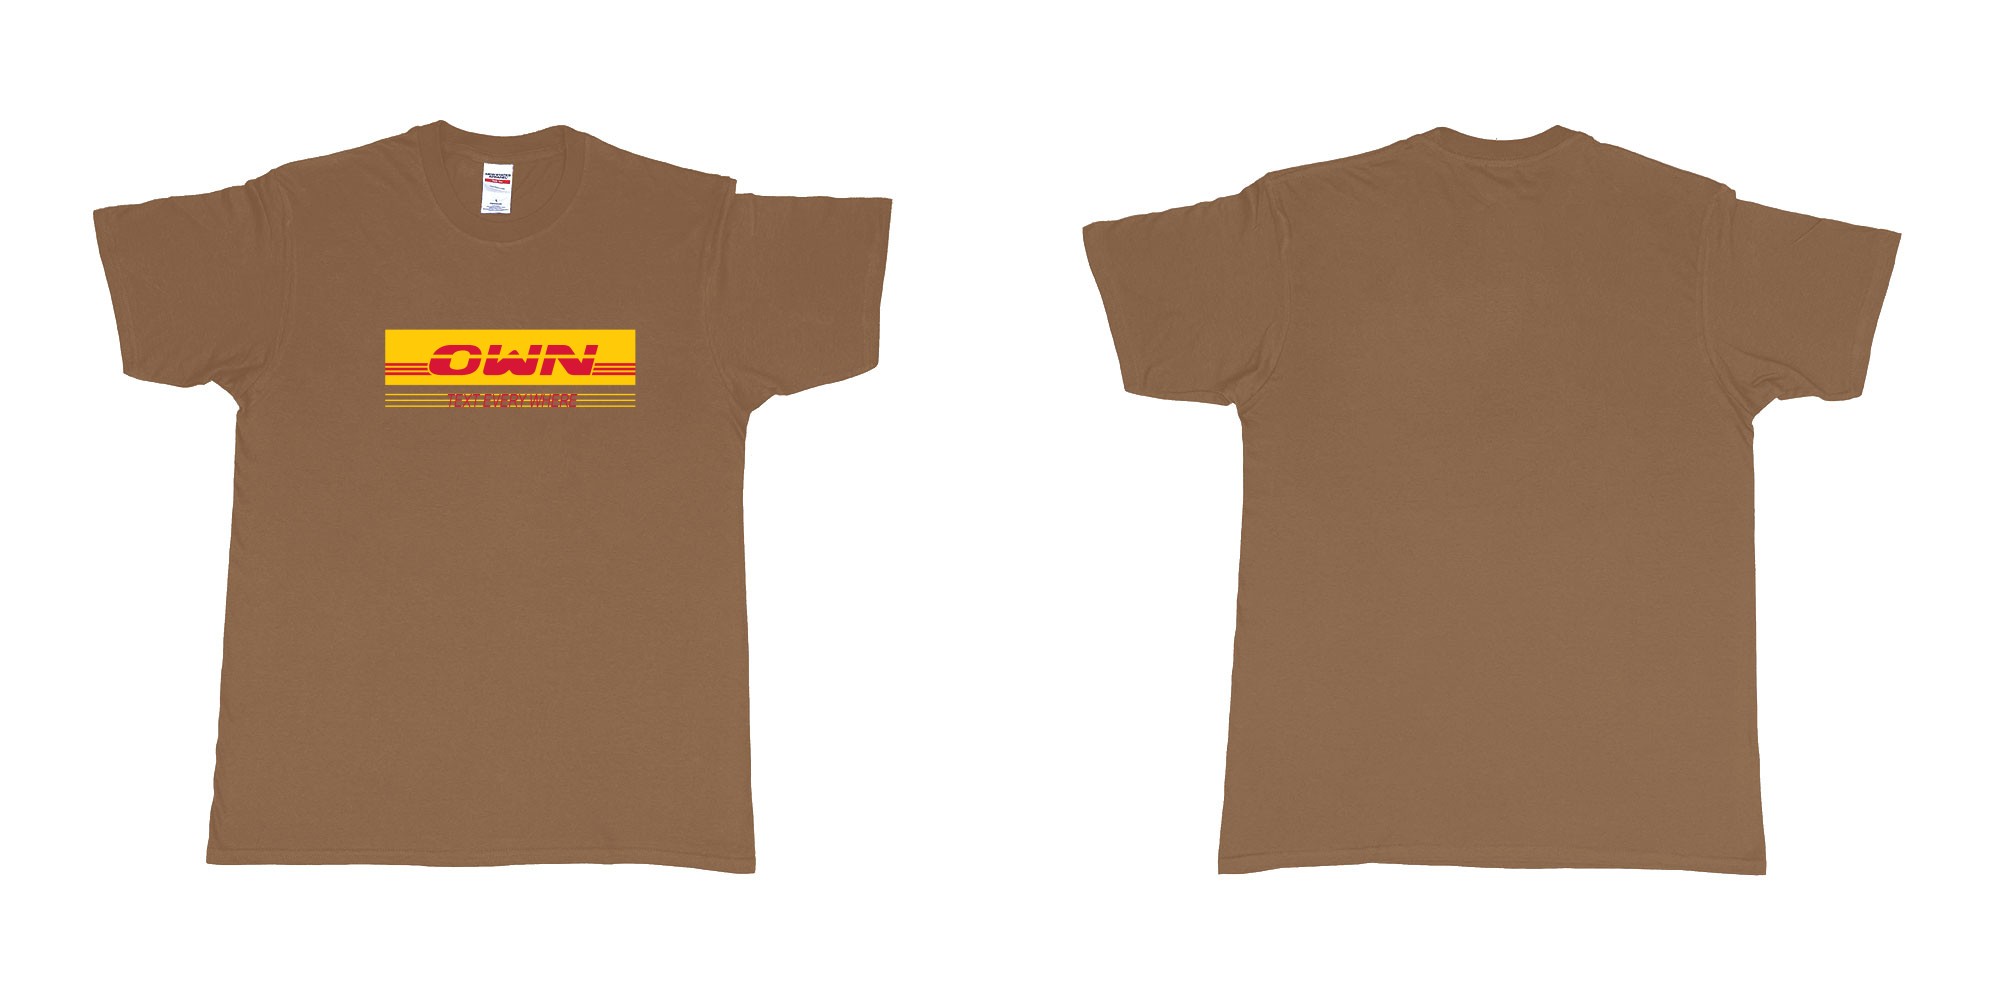 Custom tshirt design DHL in fabric color chestnut choice your own text made in Bali by The Pirate Way